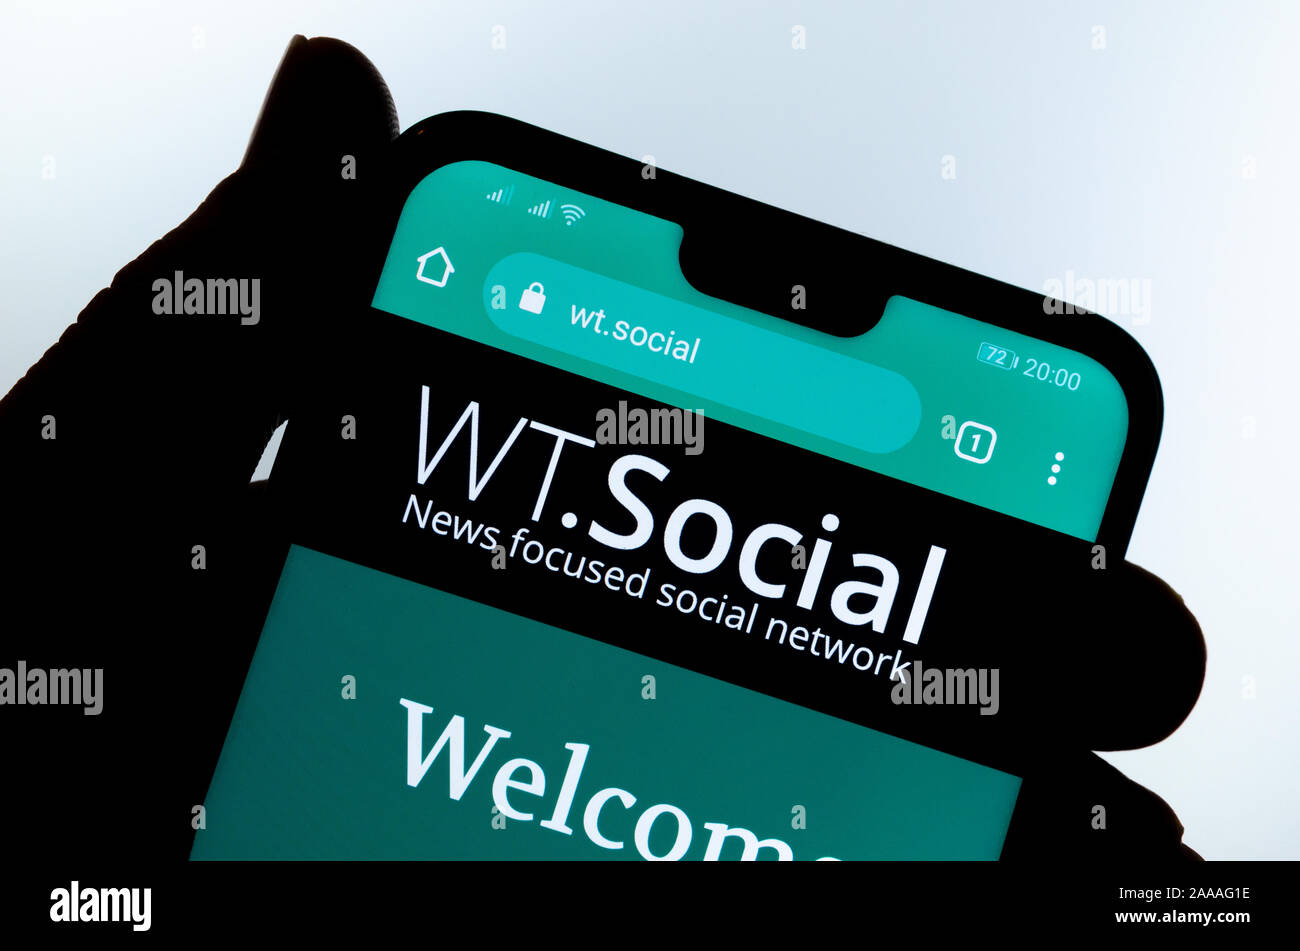 WT.Social website on the smartphone hold by a silhouette of a hand. WT:Social is news focused social network from Wikipedia founder. Stock Photo